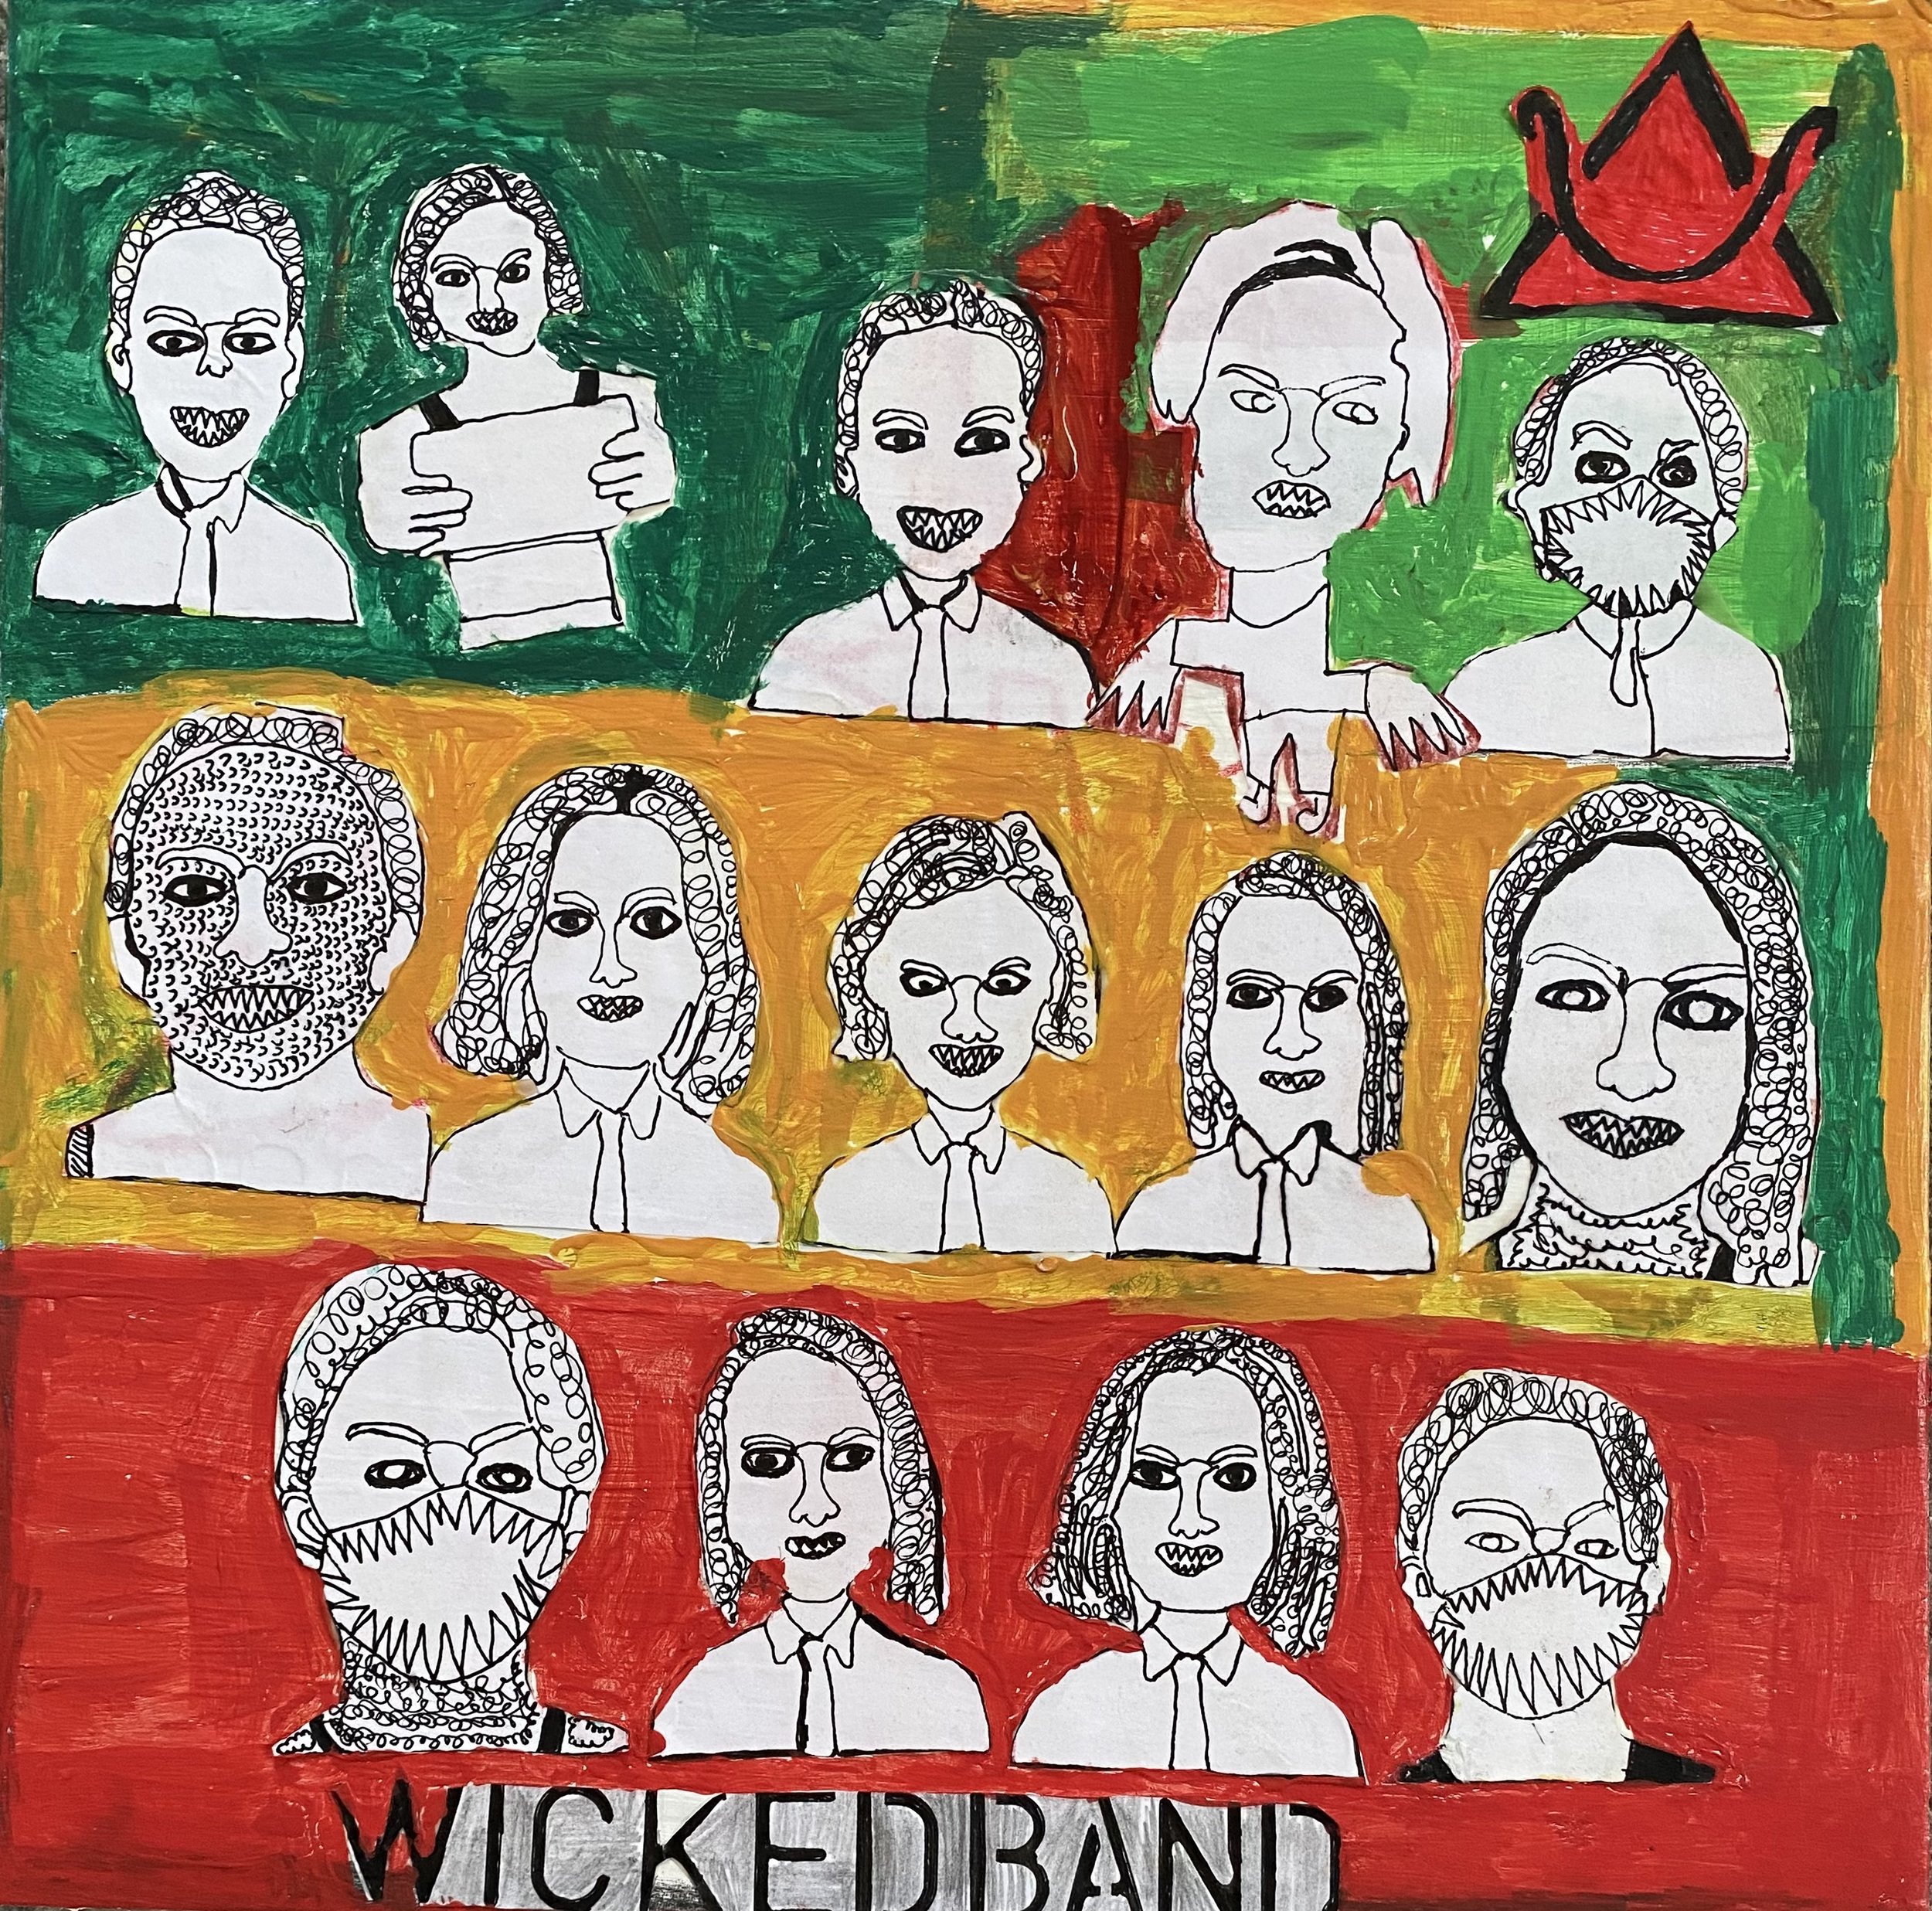 The Wicked Band